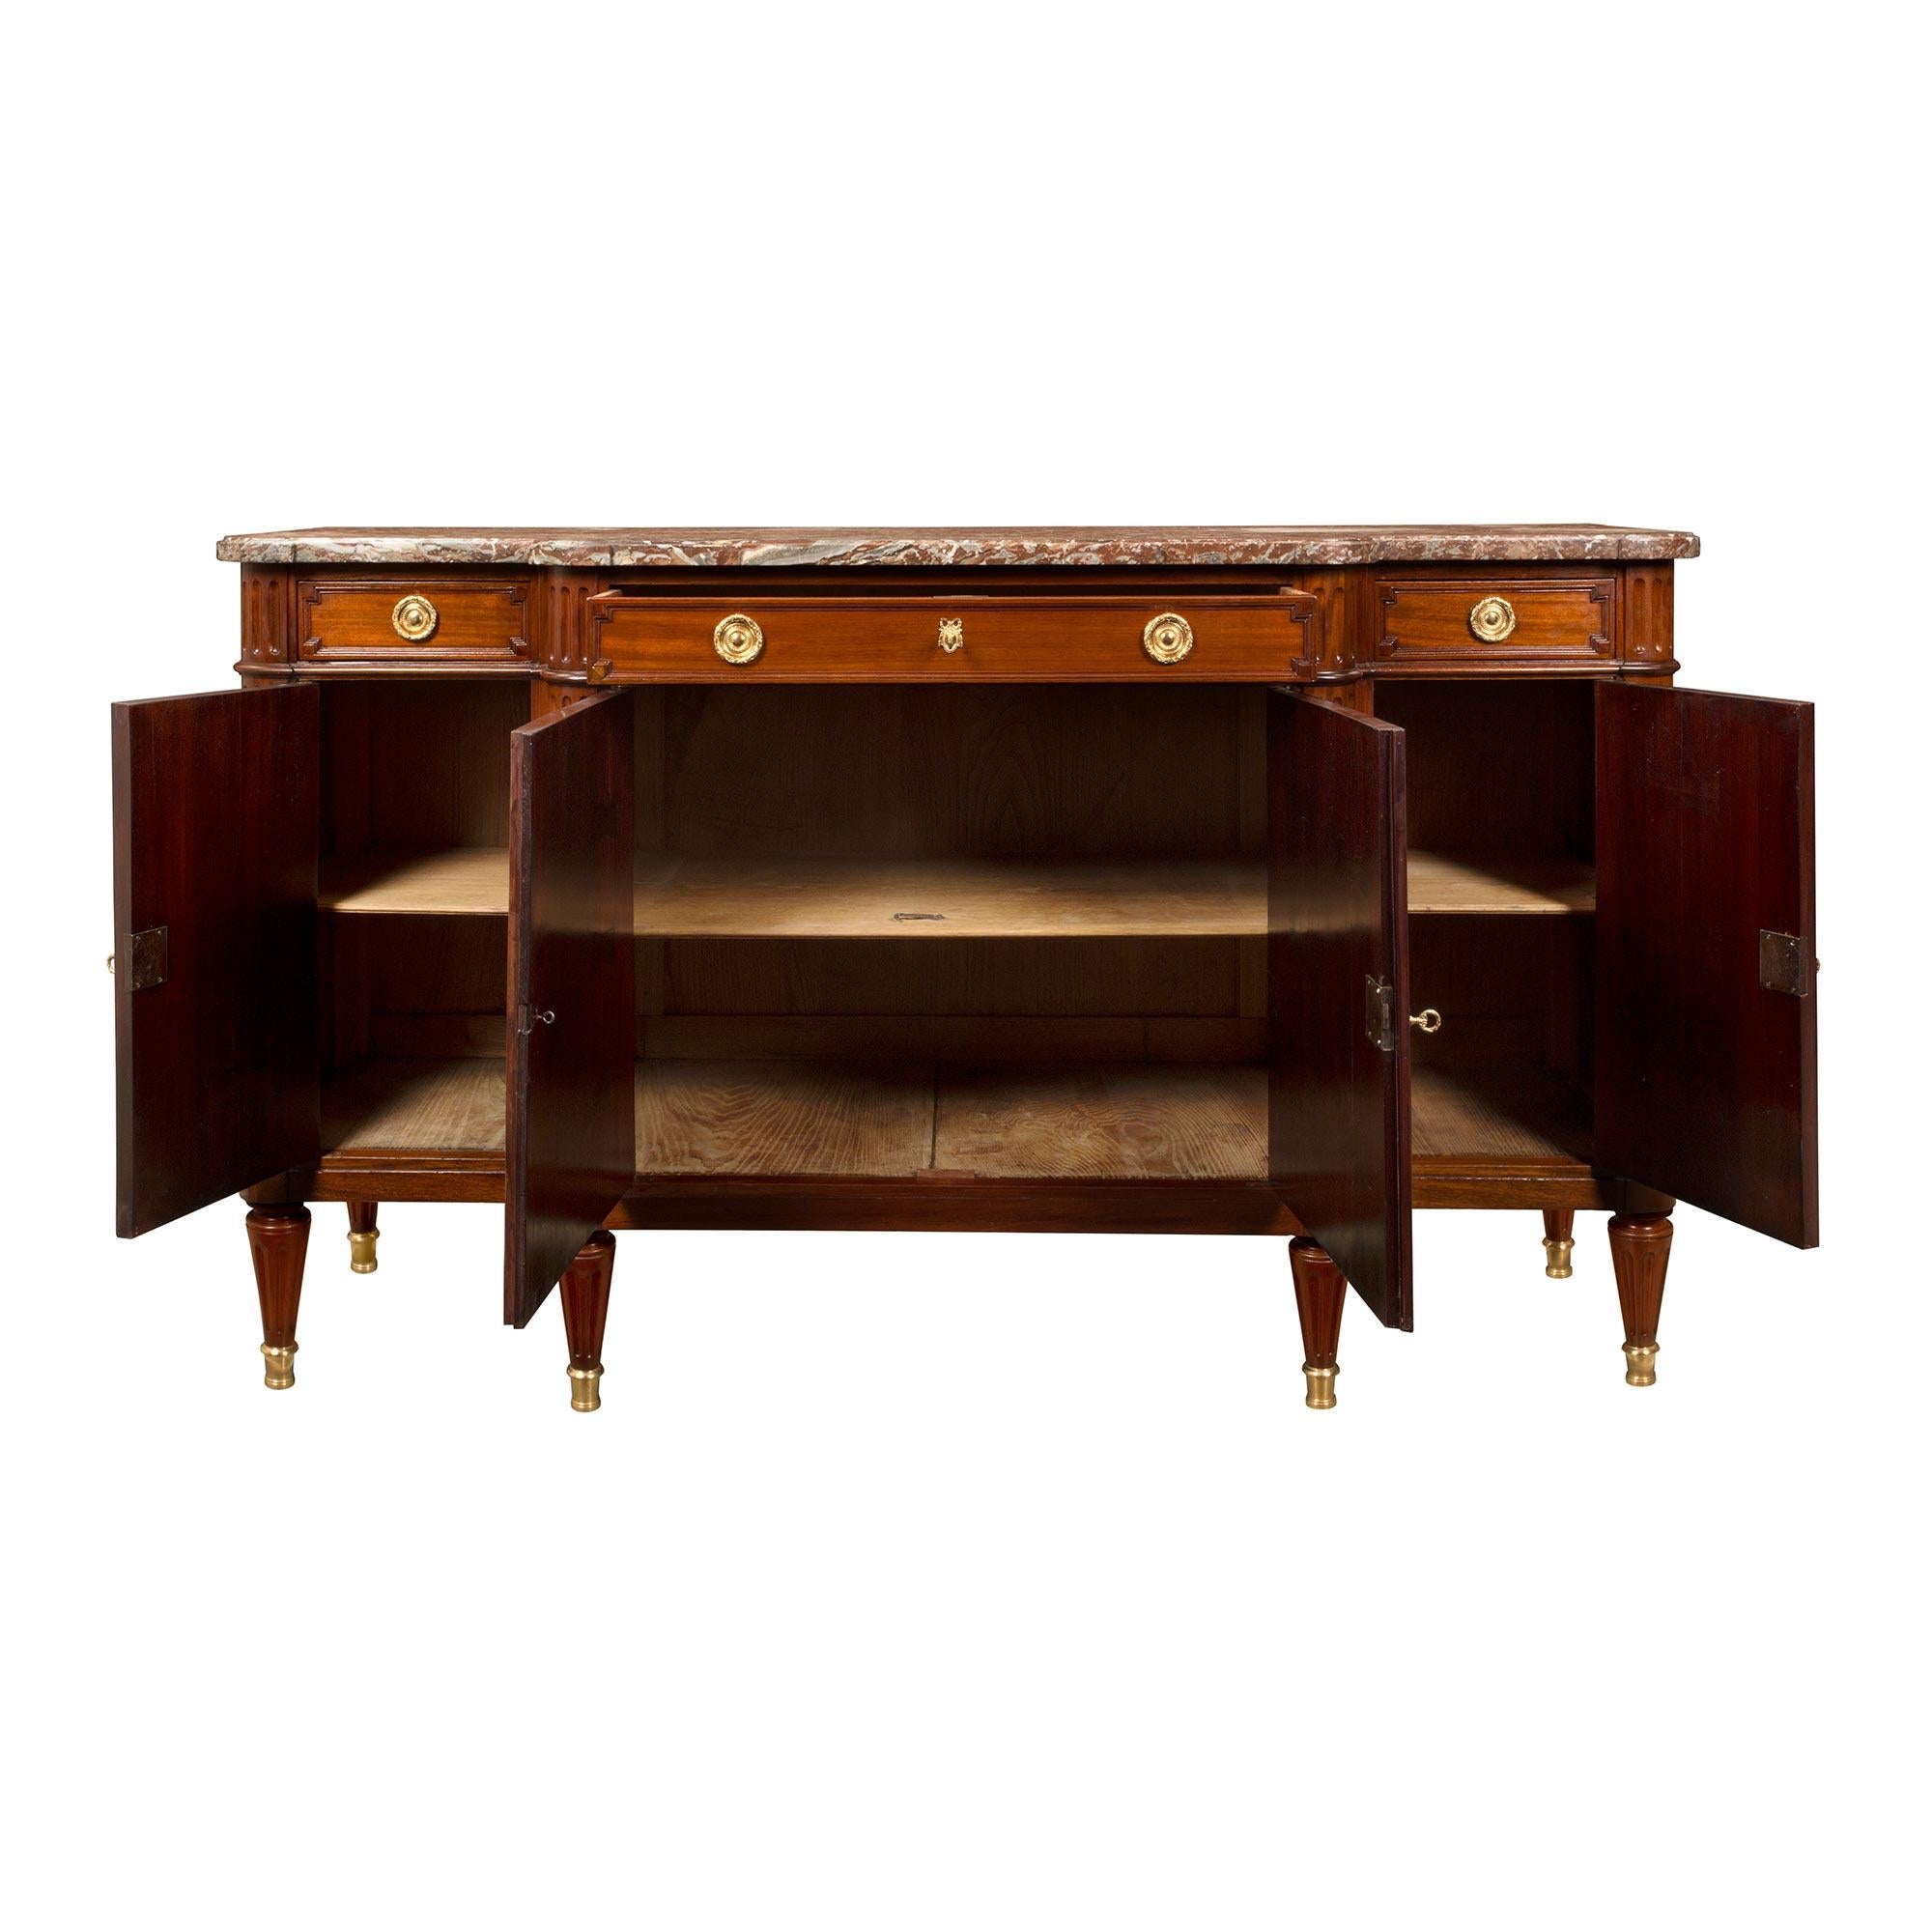 An elegant French 19th century Louis XVI st. mahogany, four door, three drawer buffet. The buffet is raised by beautiful circular tapered legs with fine ormolu sabots. At the center are two doors which display decorative recessed panels and ormolu